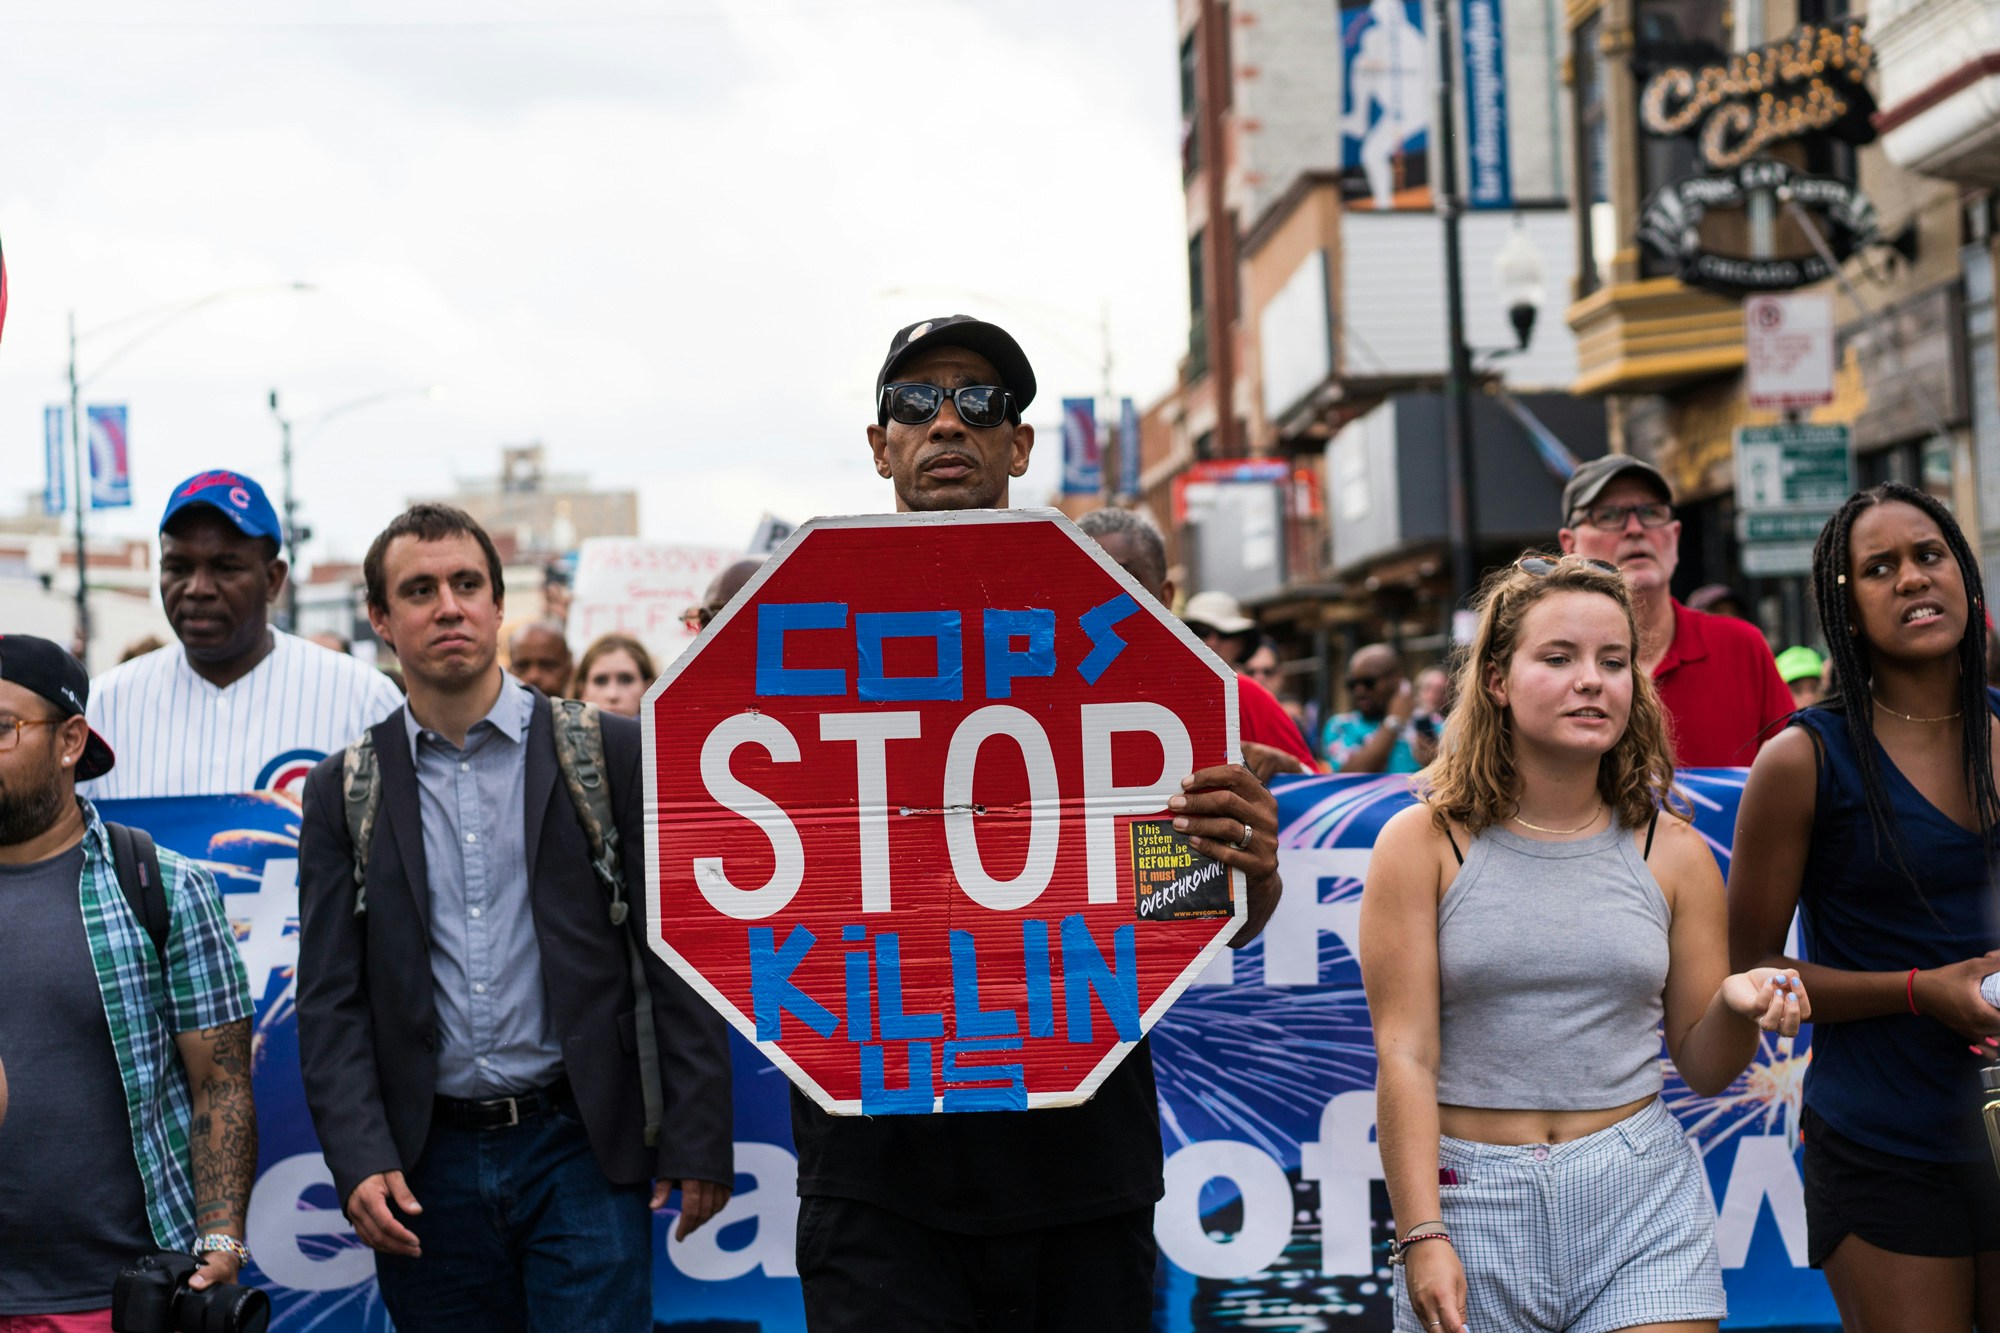 Demonstrators march down Clark Street towards Wrigley Field in a protest against gun violence in Chicago on August 2, 2018. Organizers of the march are calling for the resignation of Mayor Rahm Emanuel and Chicago Police Superintendent Eddie Johnson and want to bring attention to gun violence and poverty on the South and West Sides of Chicago. (Photo by Max Herman/NurPhoto via Getty Images)